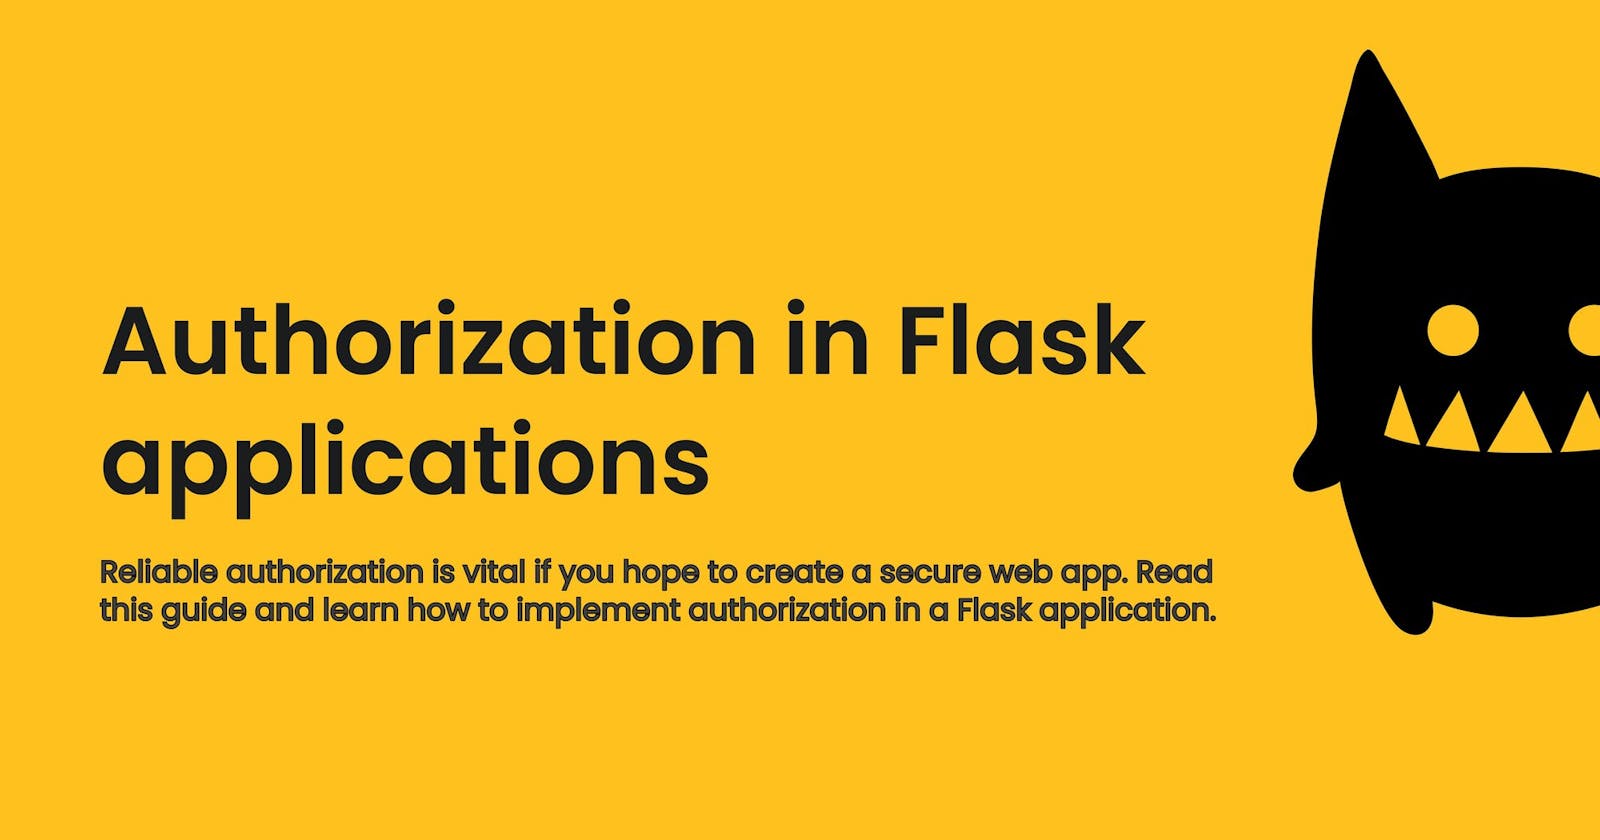 How to add authorization to a Flask application